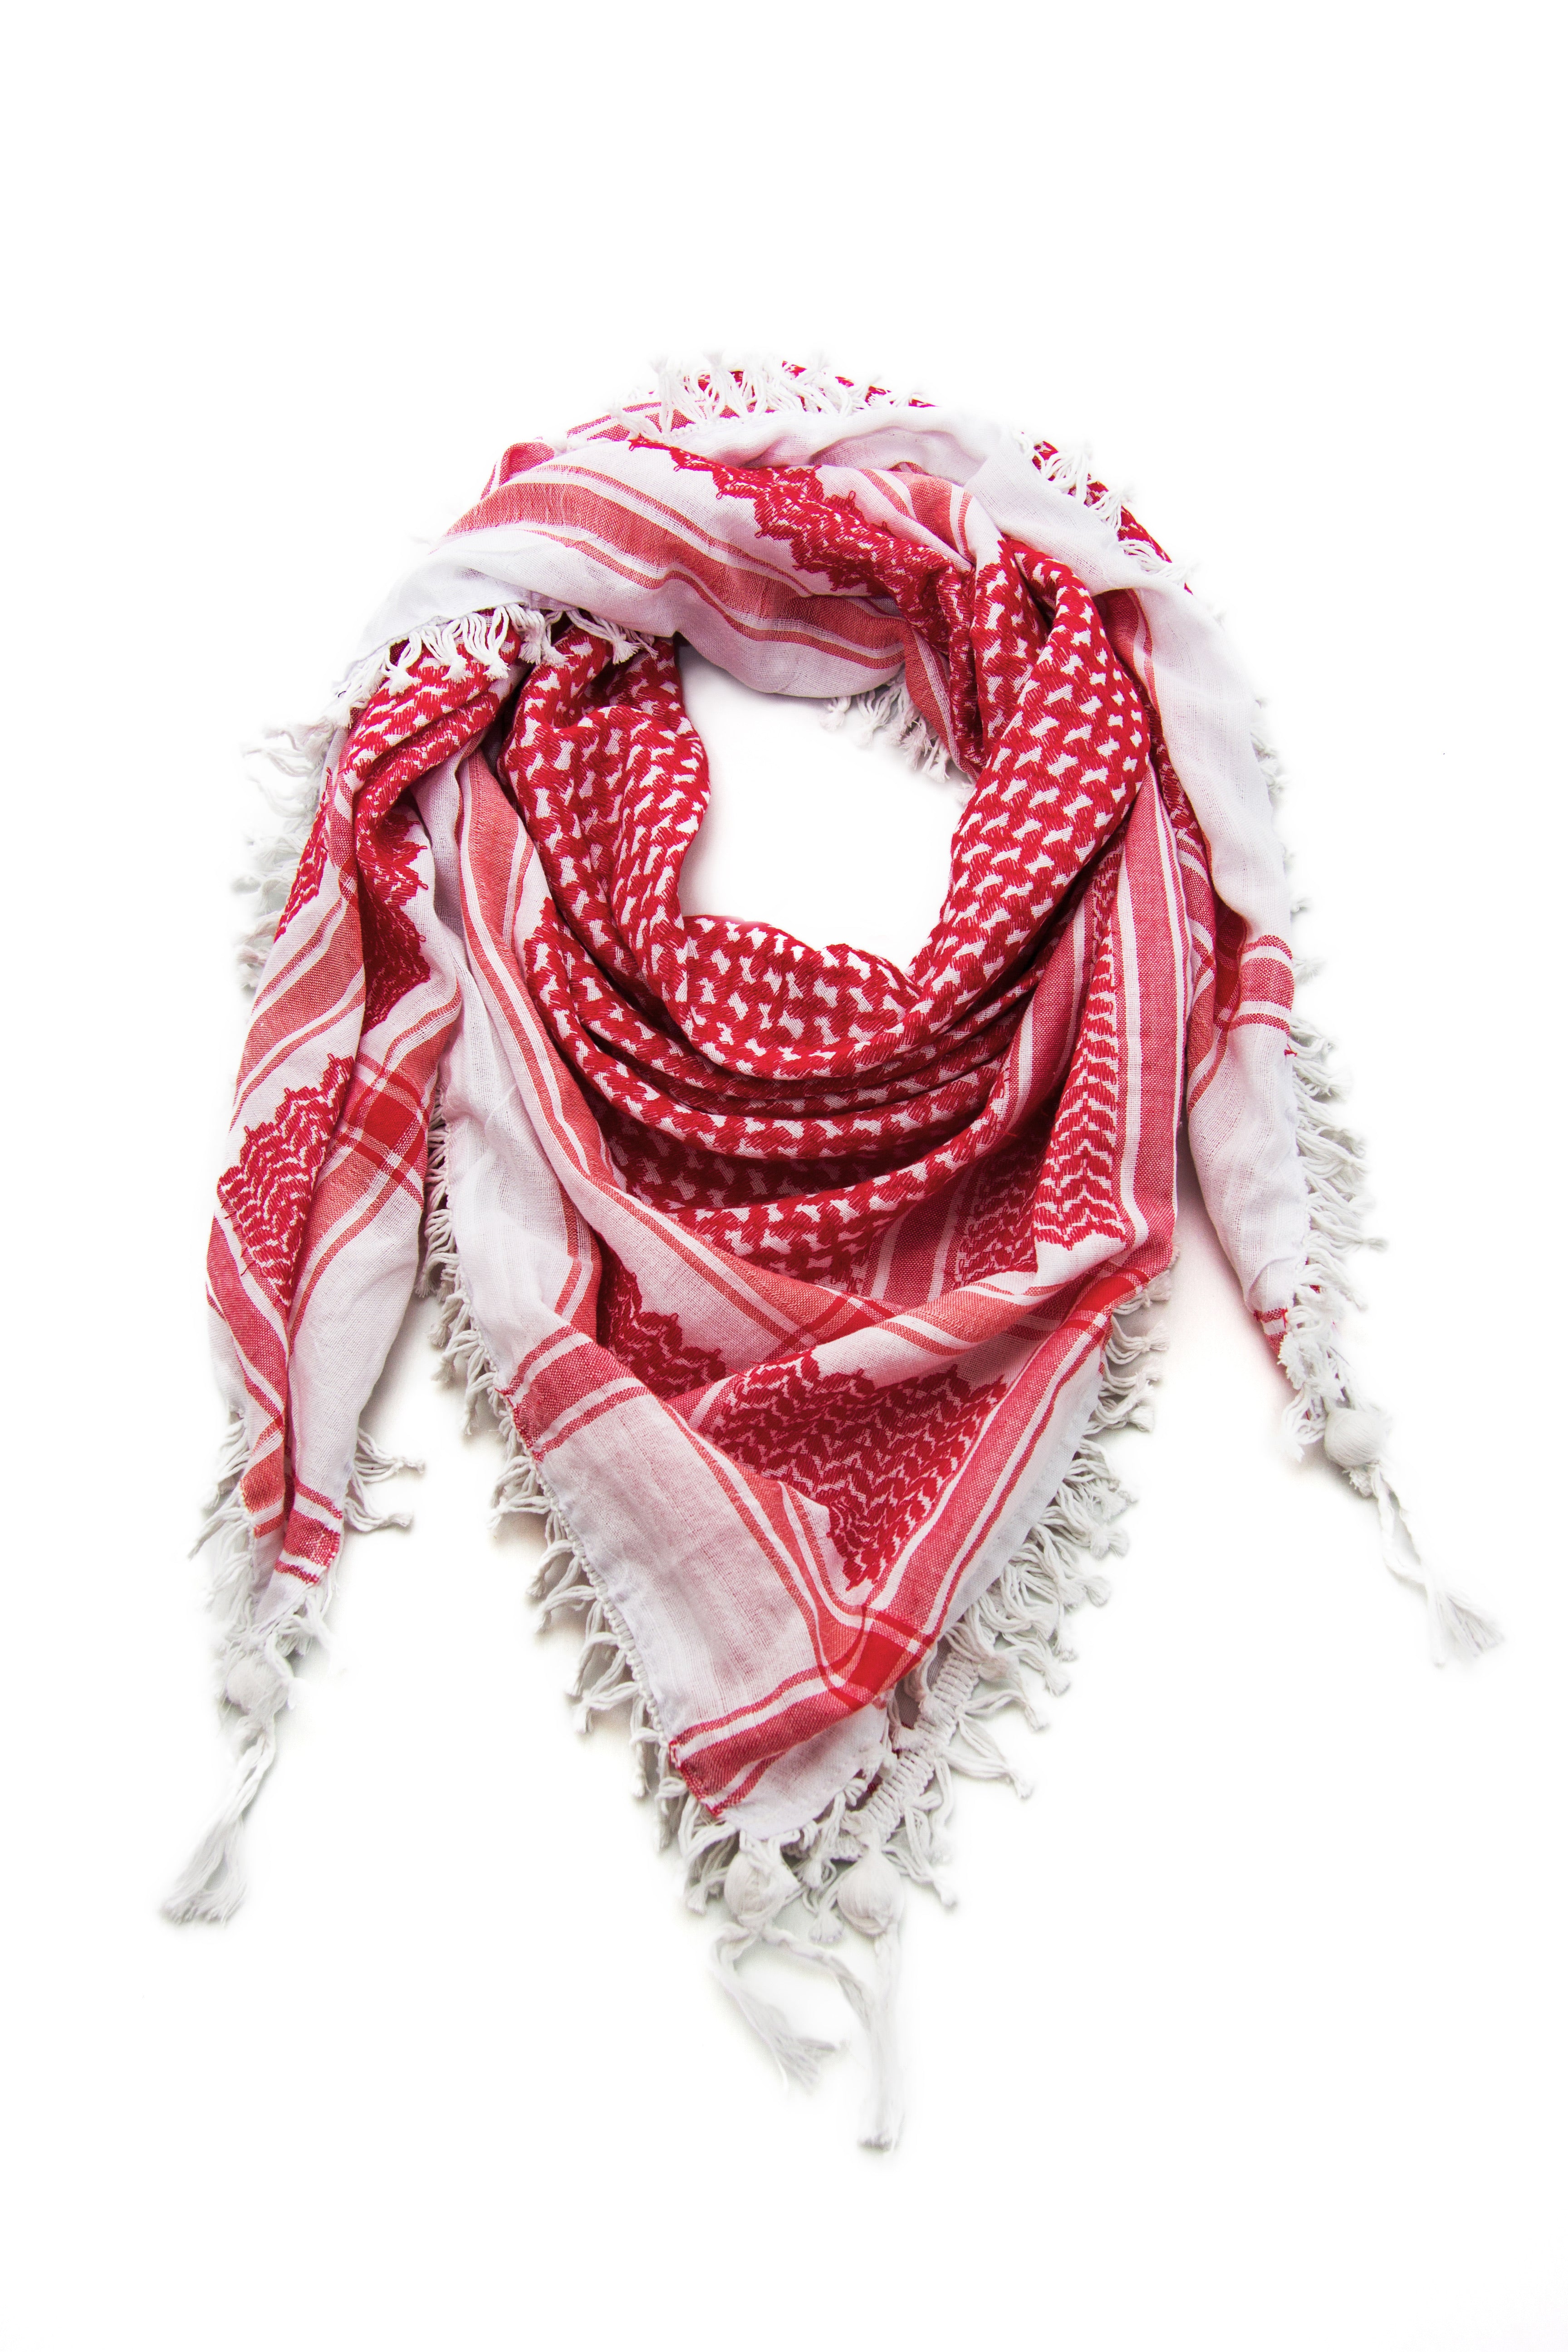 Red and White keffiyeh. Traditional design